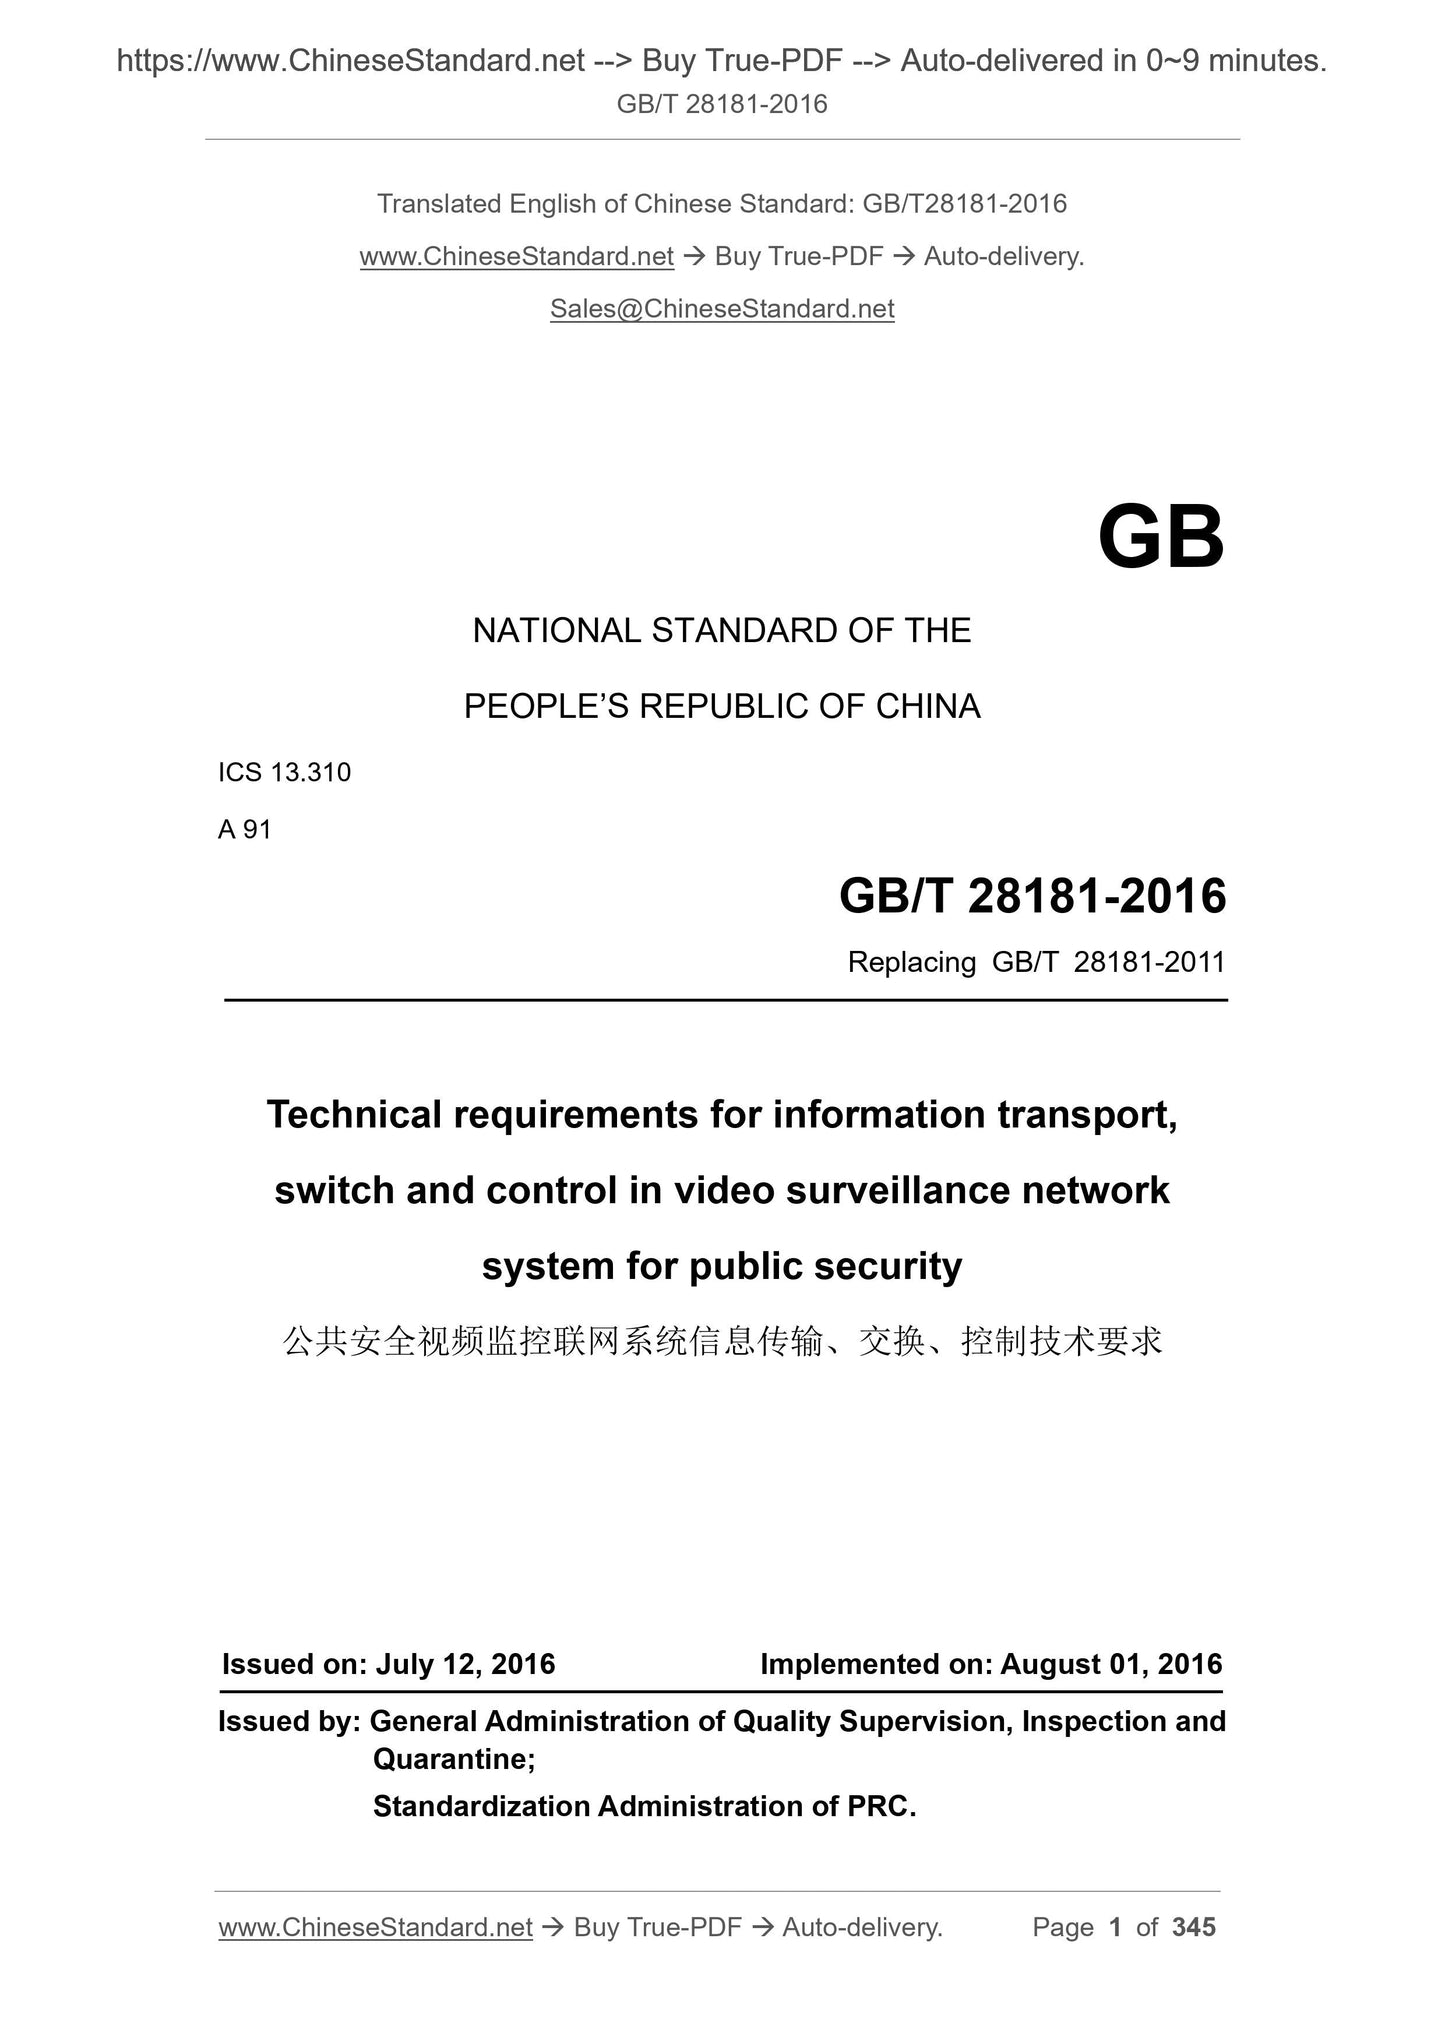 GB/T 28181-2016 Page 1